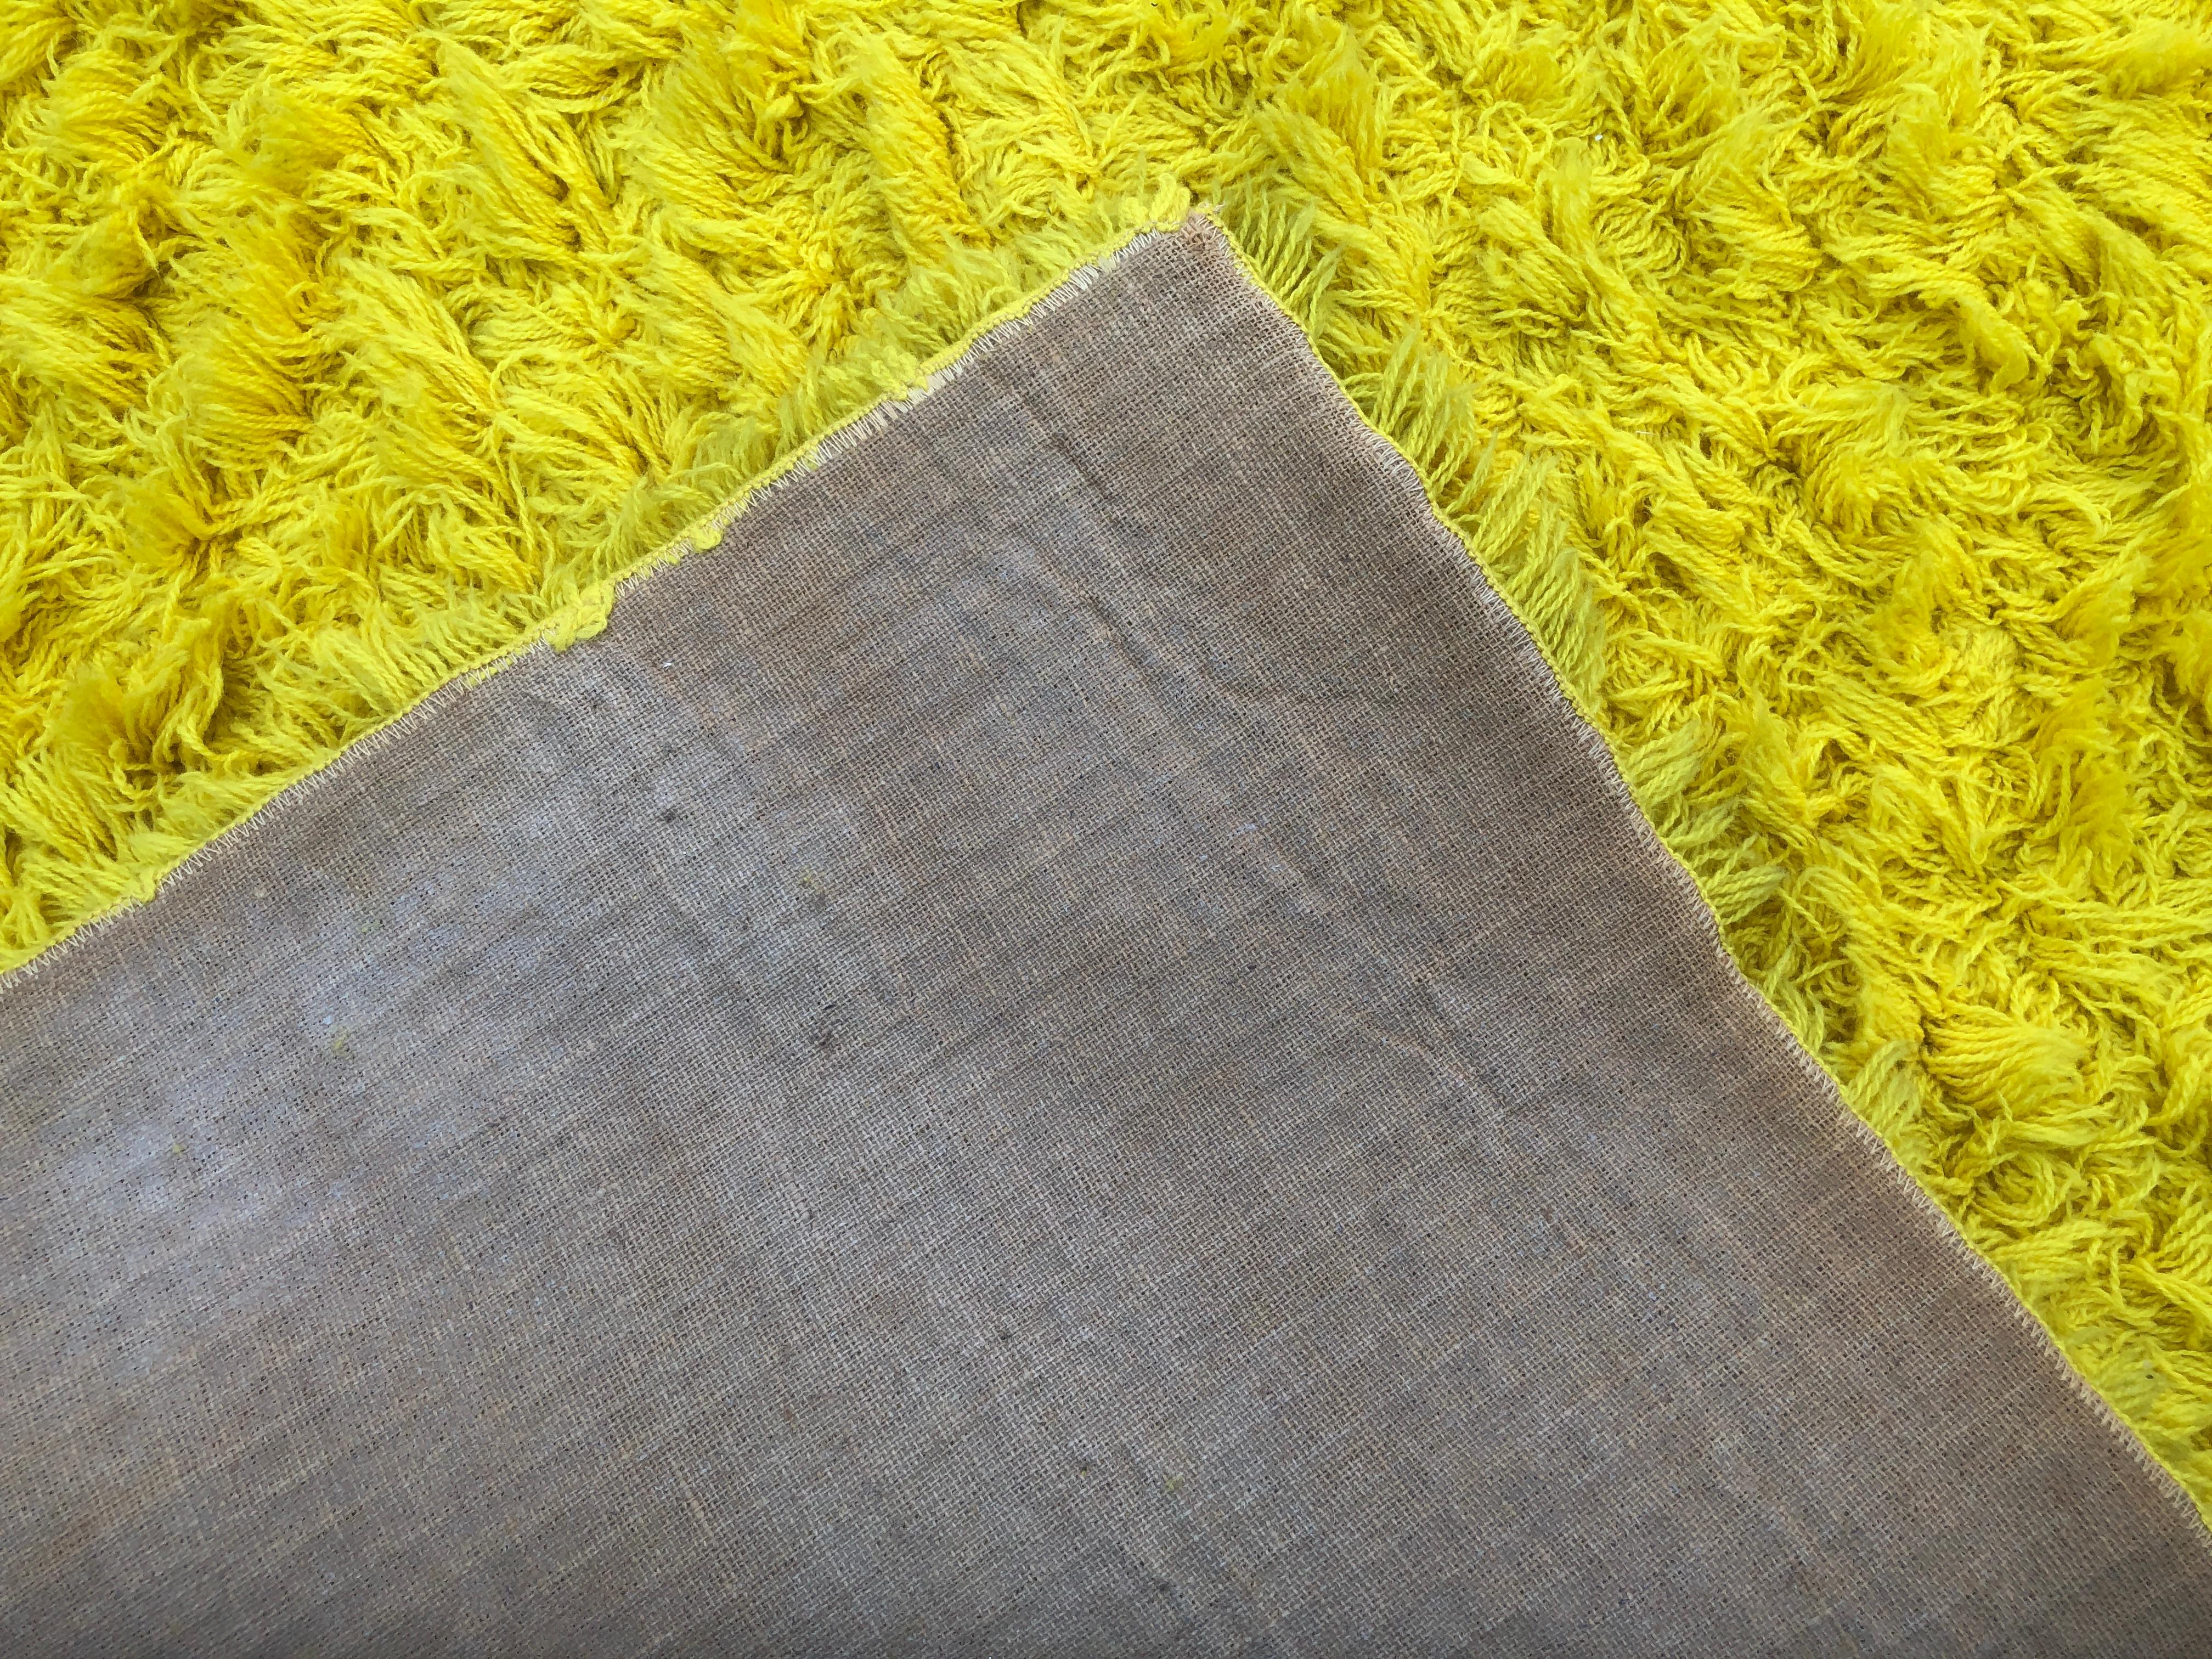 Magnificent XL Room Size Canary Yellow Shag Pile Rug, Circa 60's In Good Condition For Sale In Pemberton, NJ